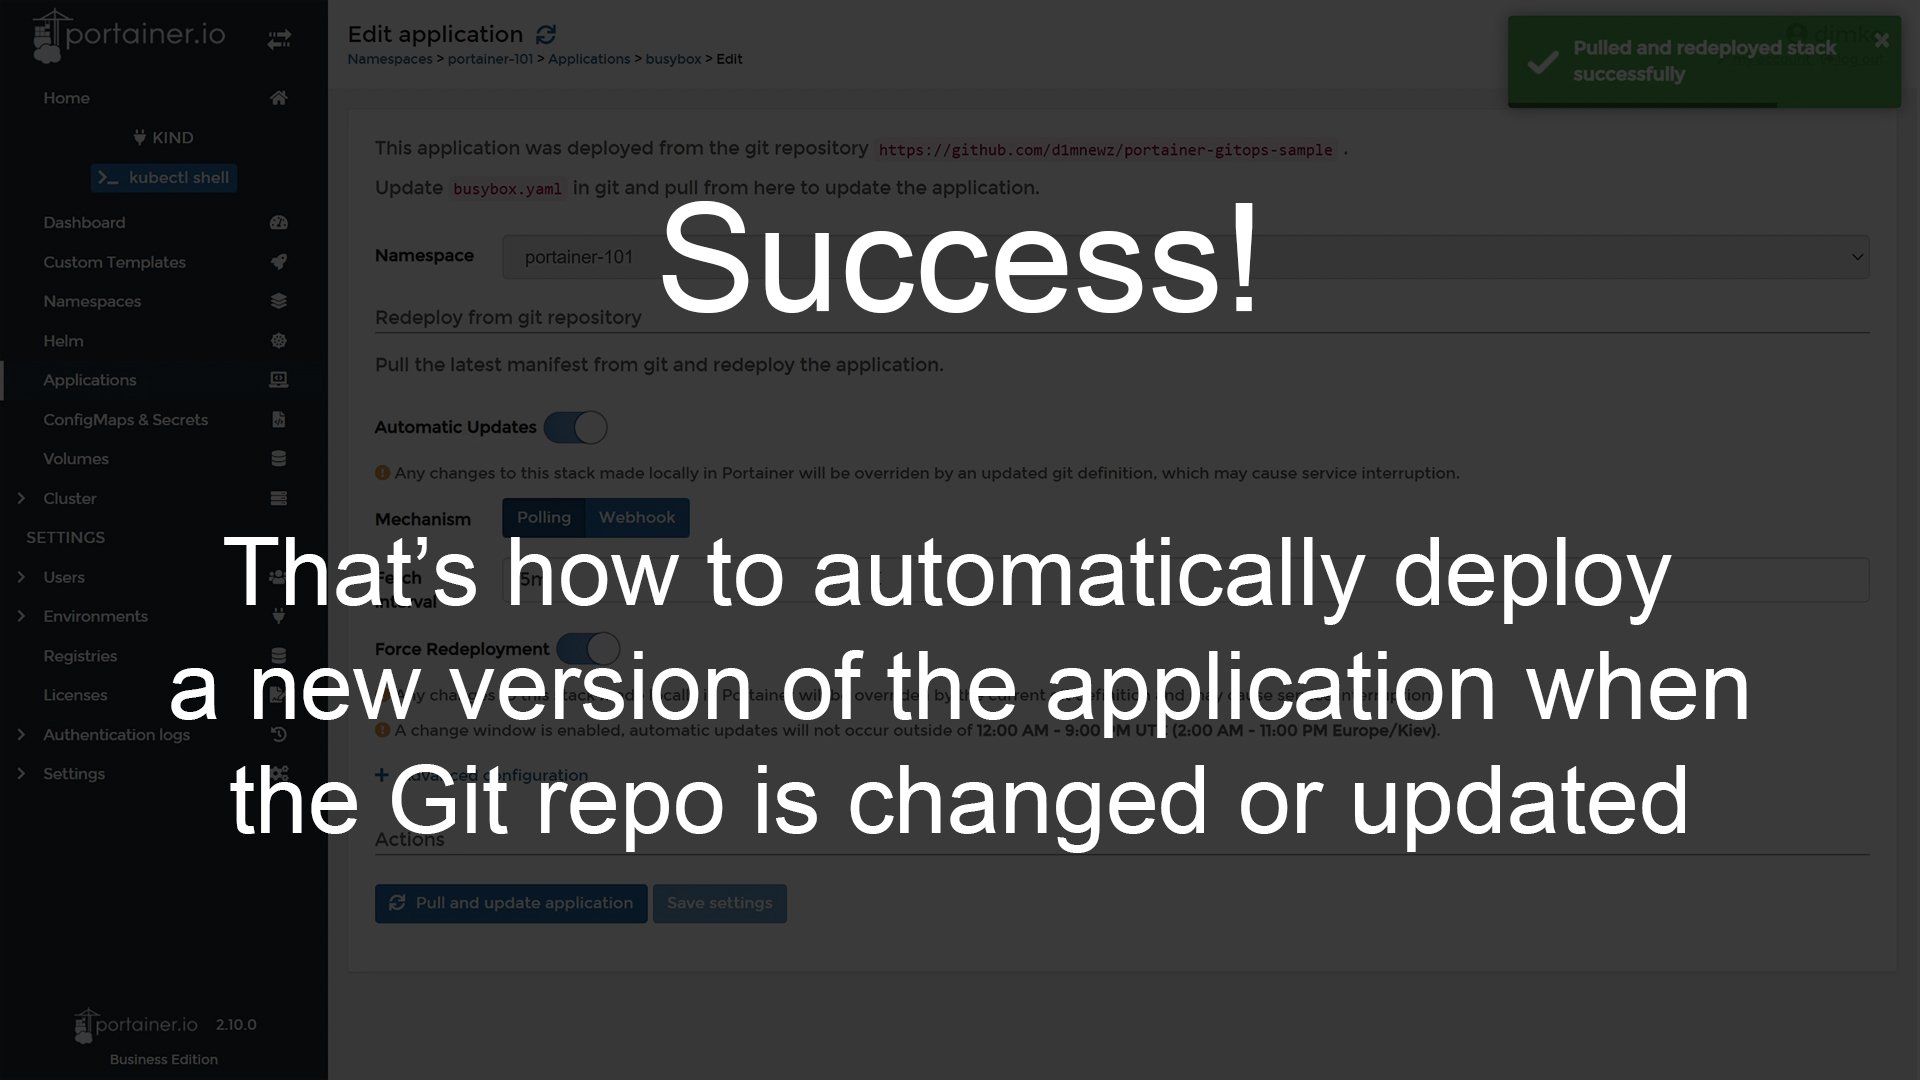 Clickable - Forced redeployment - success